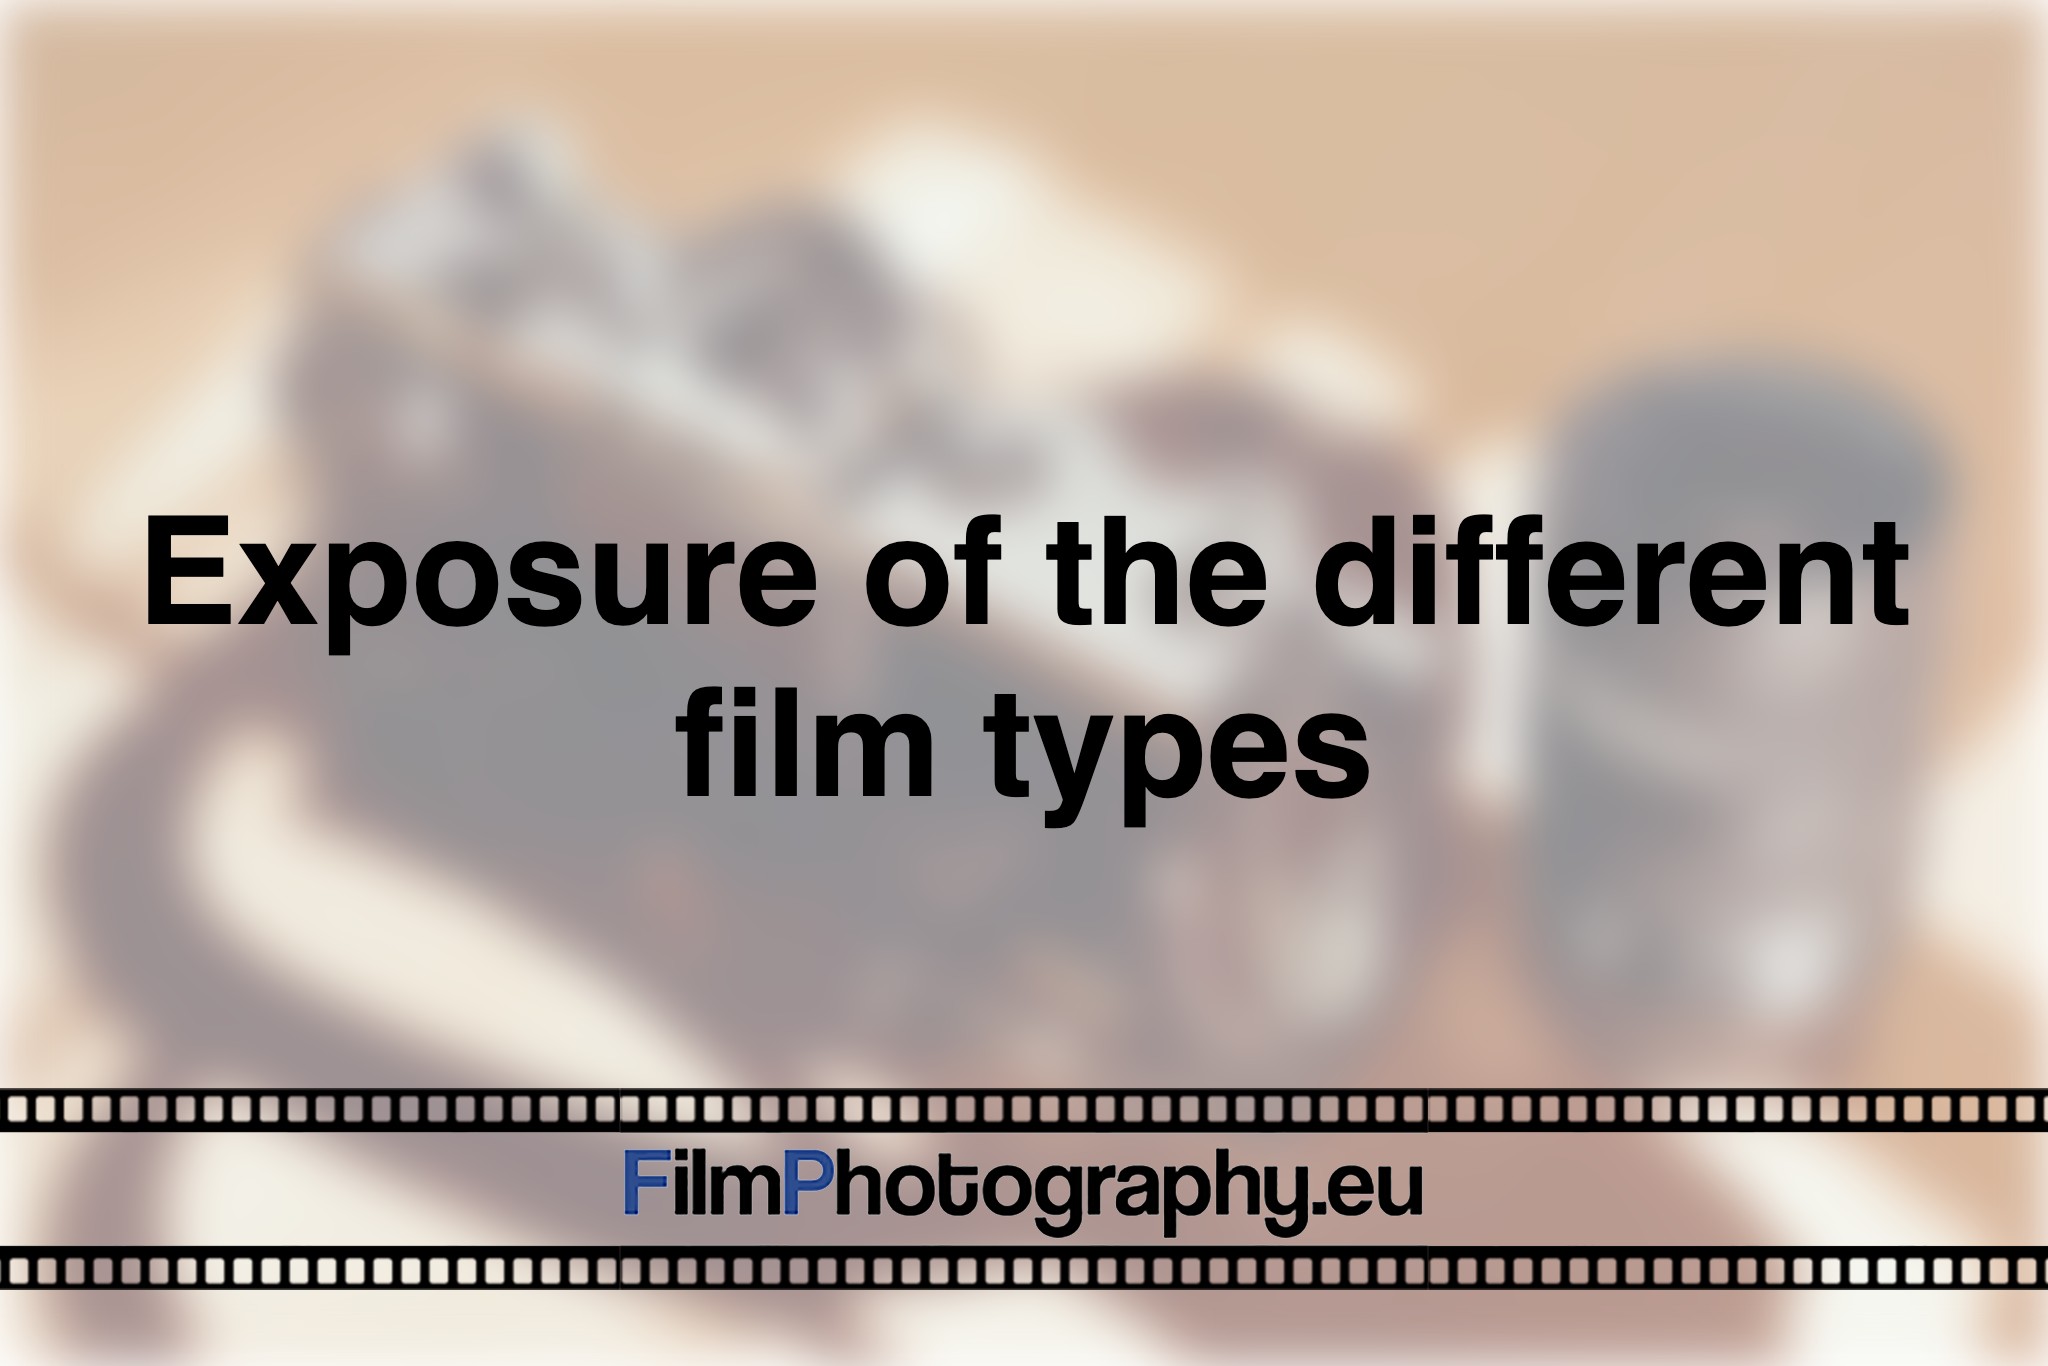 exposure-of-the-different-film-types-photo-bnv